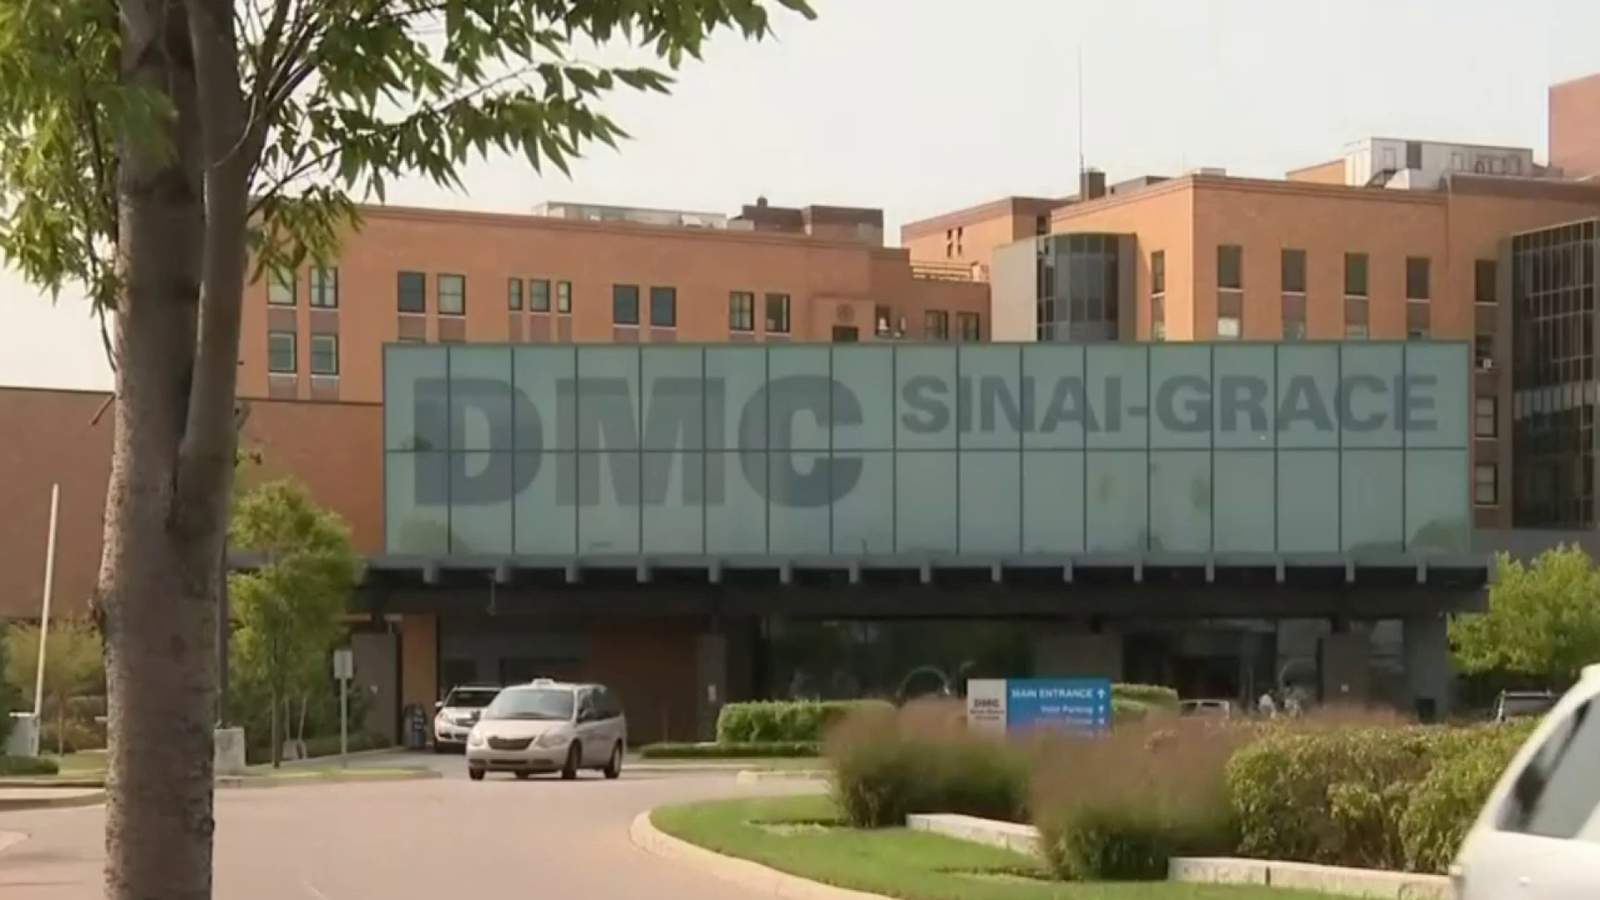 Police searching for man who left newborn at Sinai-Grace Hospital, concerned about mother